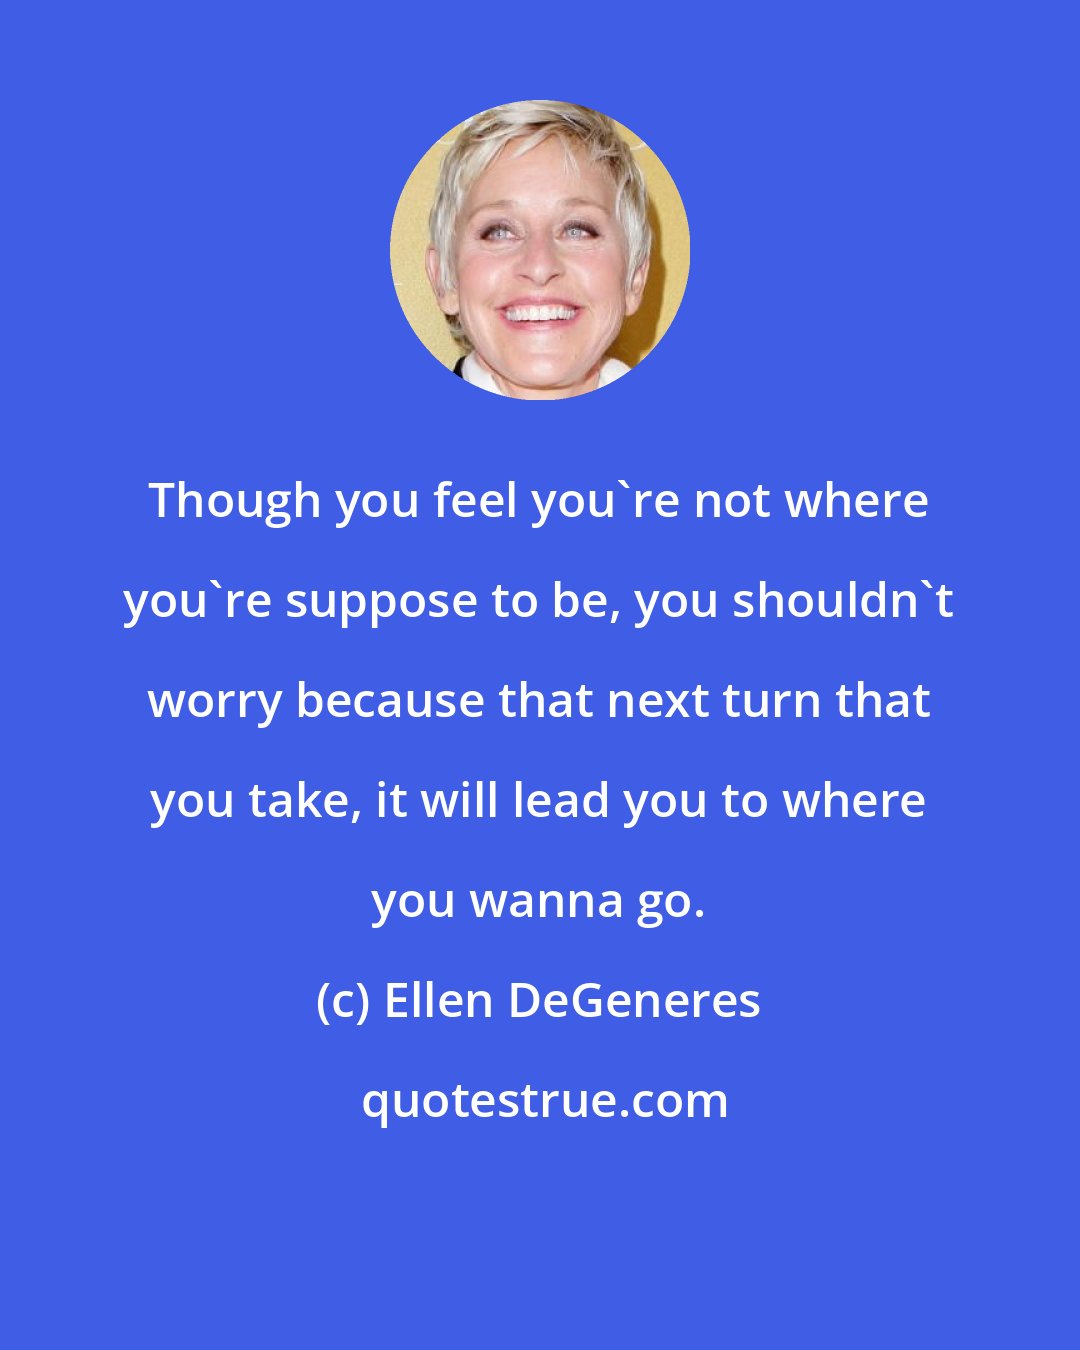 Ellen DeGeneres: Though you feel you're not where you're suppose to be, you shouldn't worry because that next turn that you take, it will lead you to where you wanna go.